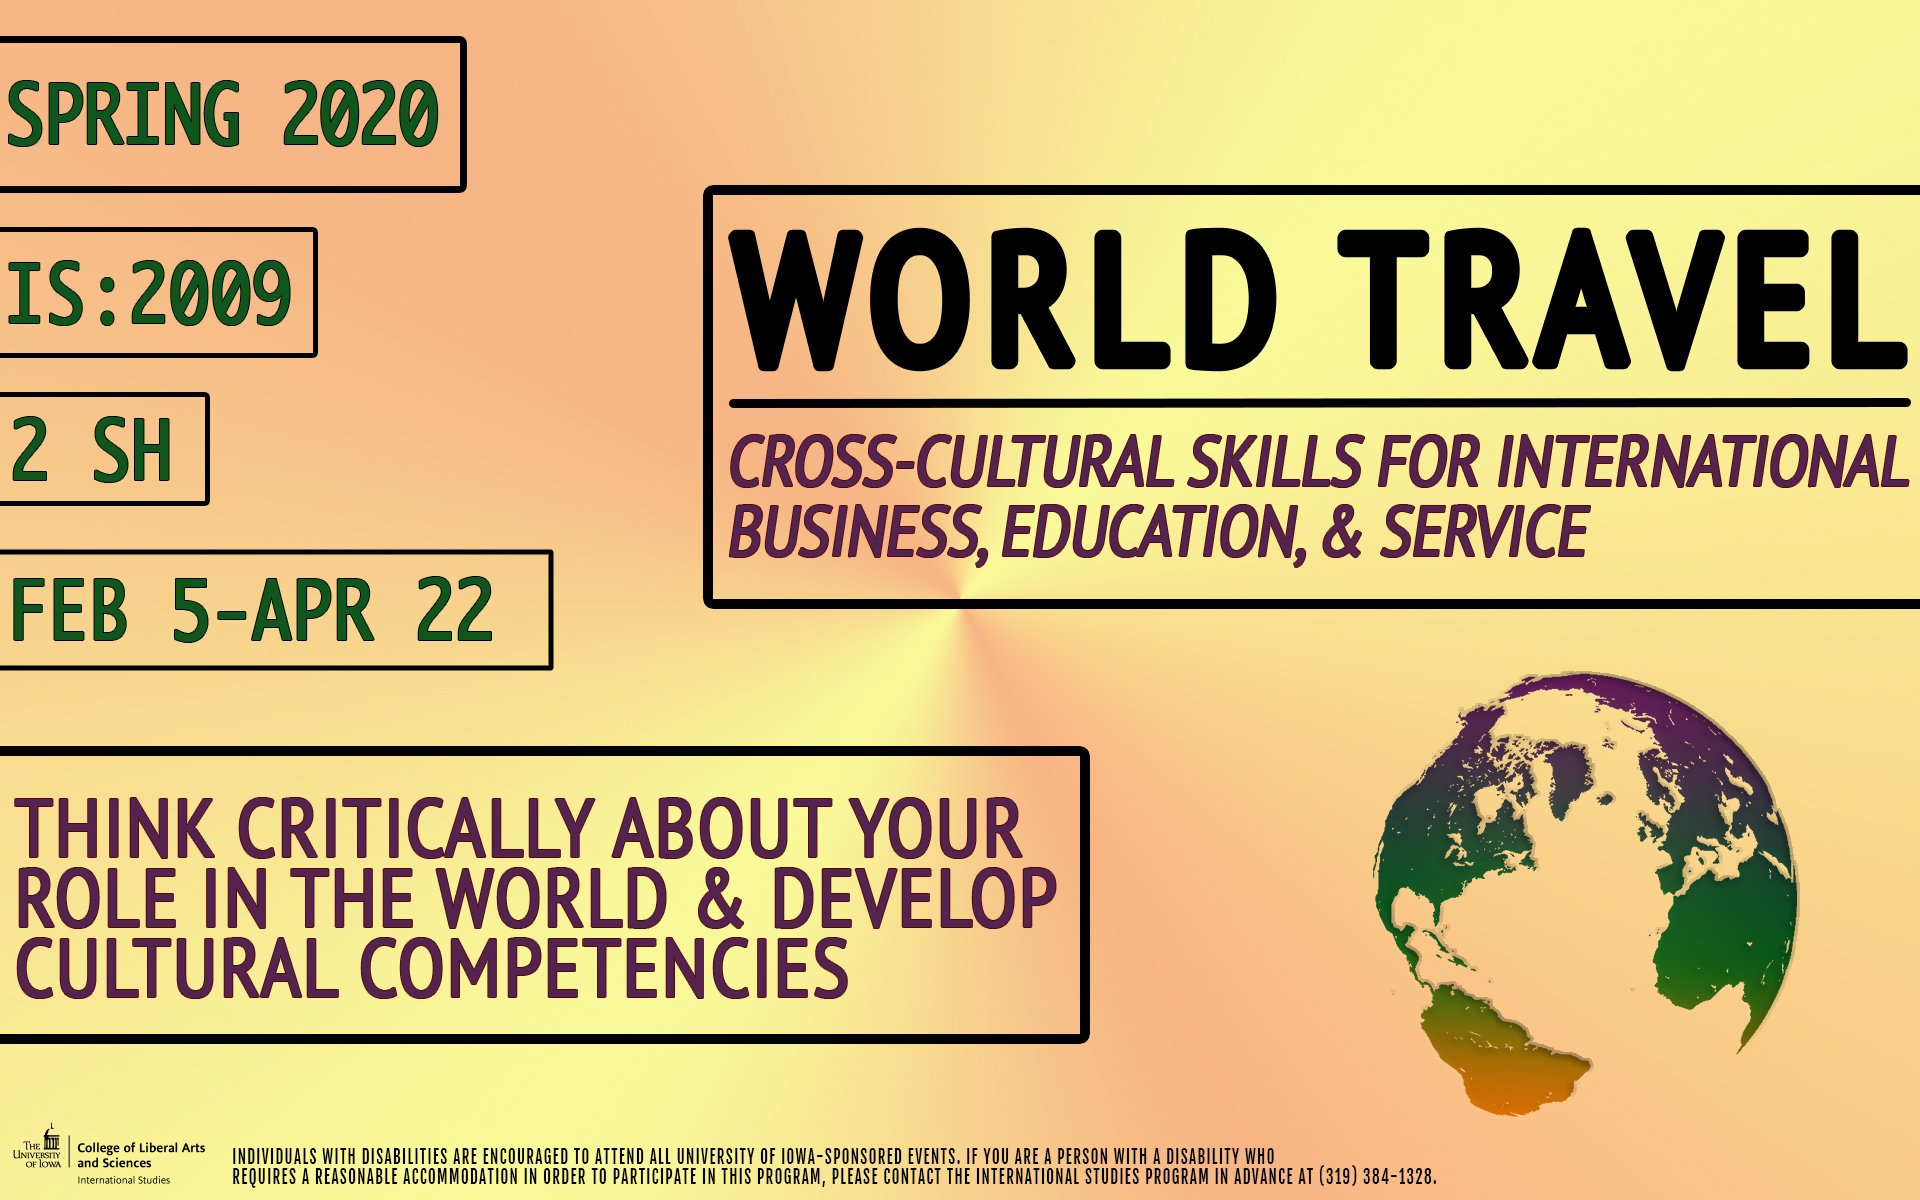 Spring 2020 IS:2009 2 sh Feb 5-apr 22 World travel cross-cultural skills for international business education and service.